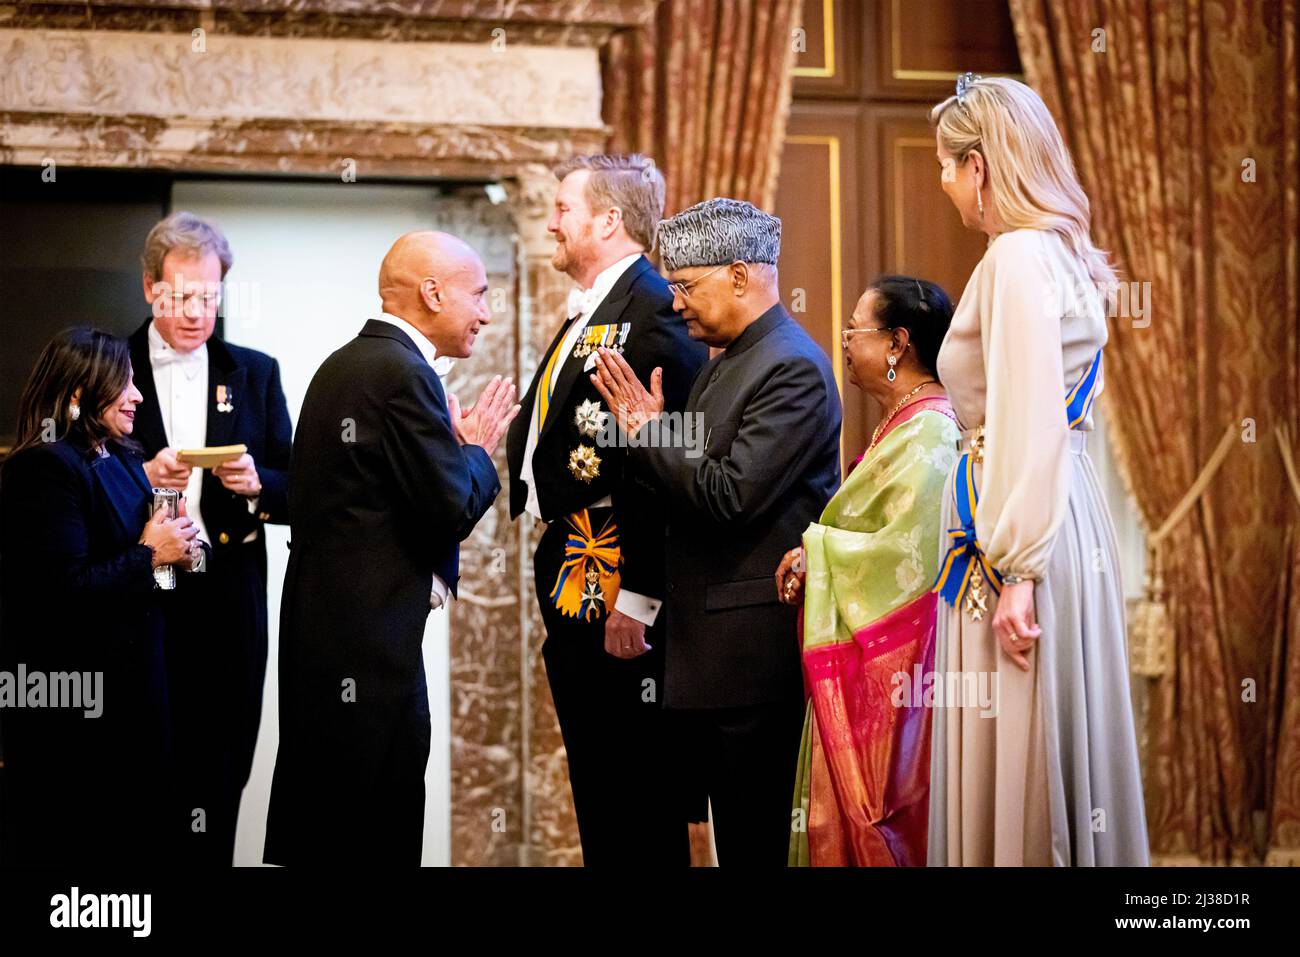 the Netherlands. 05-04-2022 Gala Queen Maxima and King Willem-Alexander with the President of the republic of India, Ram Nath Kovind and his wife, Savita Kovind, during the state banquet at the Dam palace, Paleis op de Dam, in Amsterdam on the 1st day of the 2 day statevisit to the Netherlands.   ( Photo by PPE/Sipa USA) Stock Photo